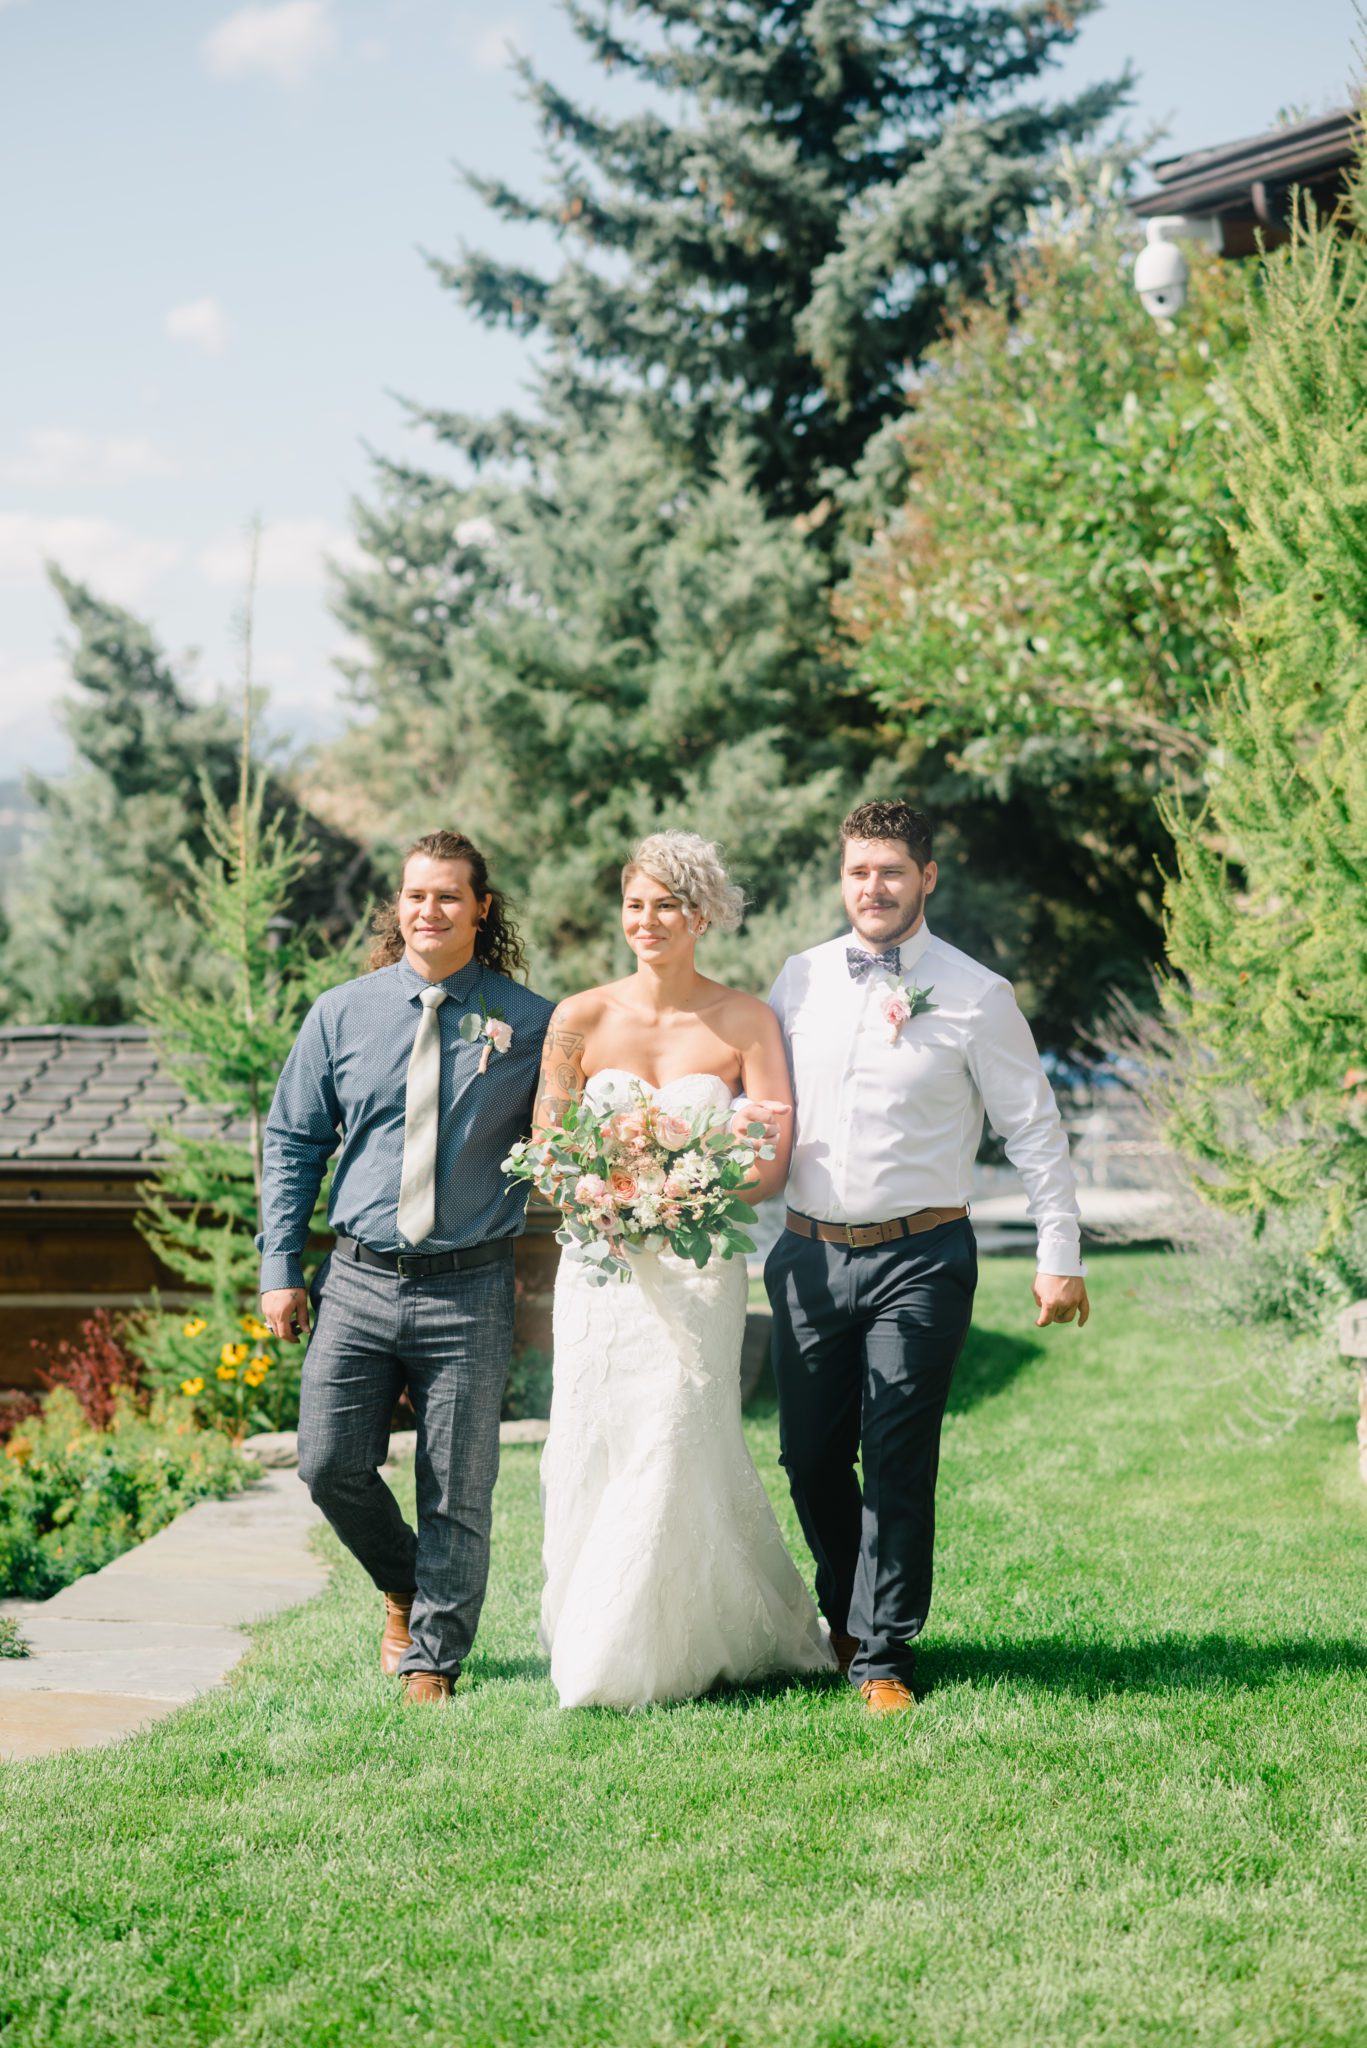 Bride walks down the aisle at this Invermere wedding ceremony